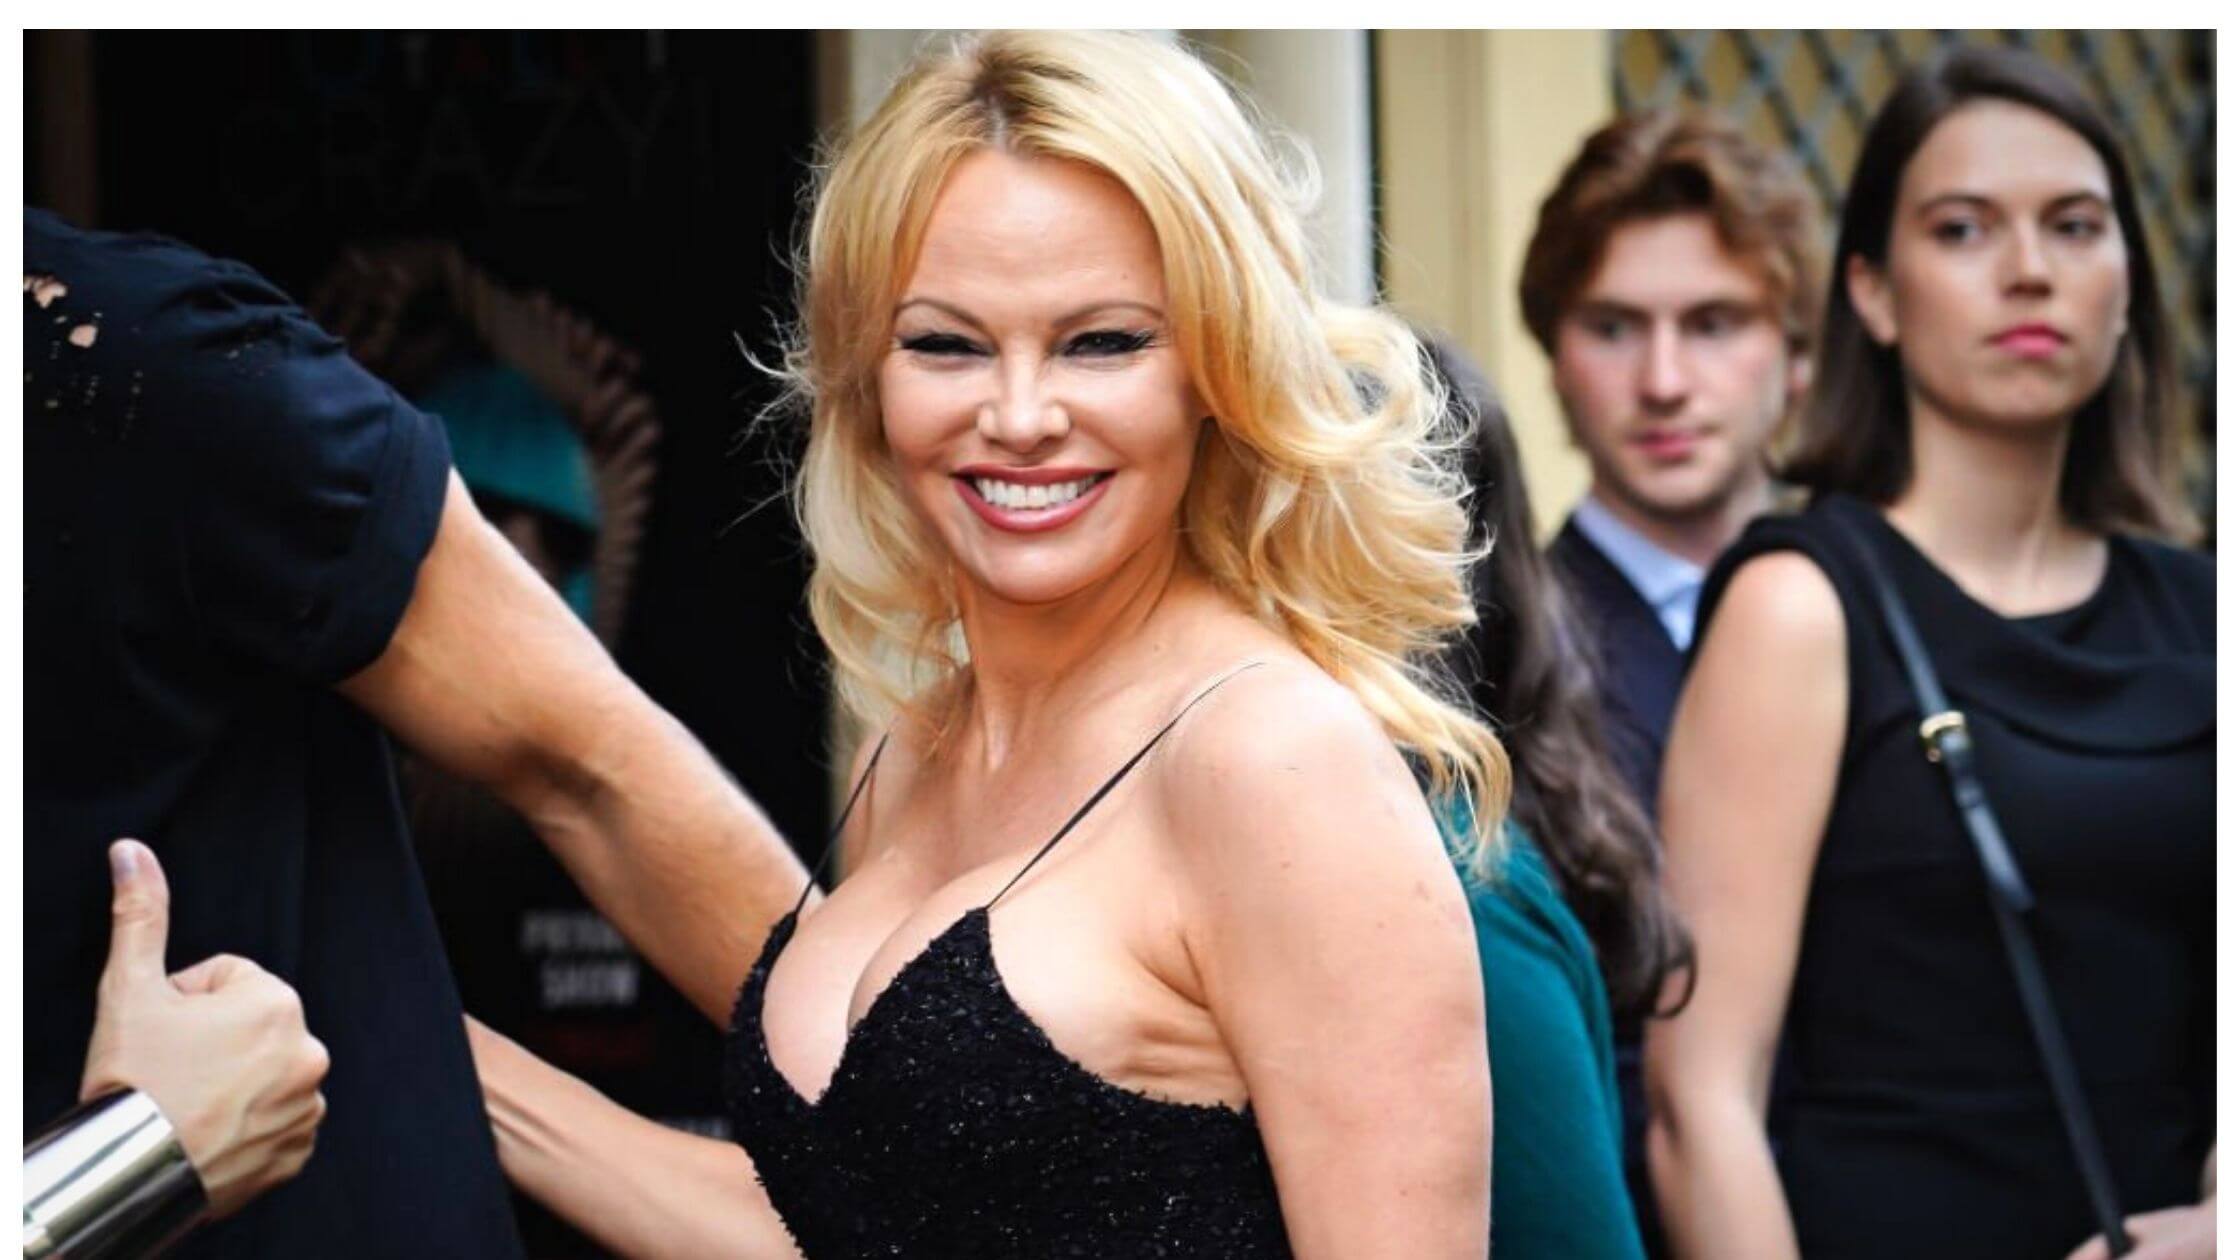 A-Sweet-Escape-For-Me-Why-Pamela-Anderson-Became-So-Emotional-Pamela-Anderson-Headed-to-Broadways-Chicago-1